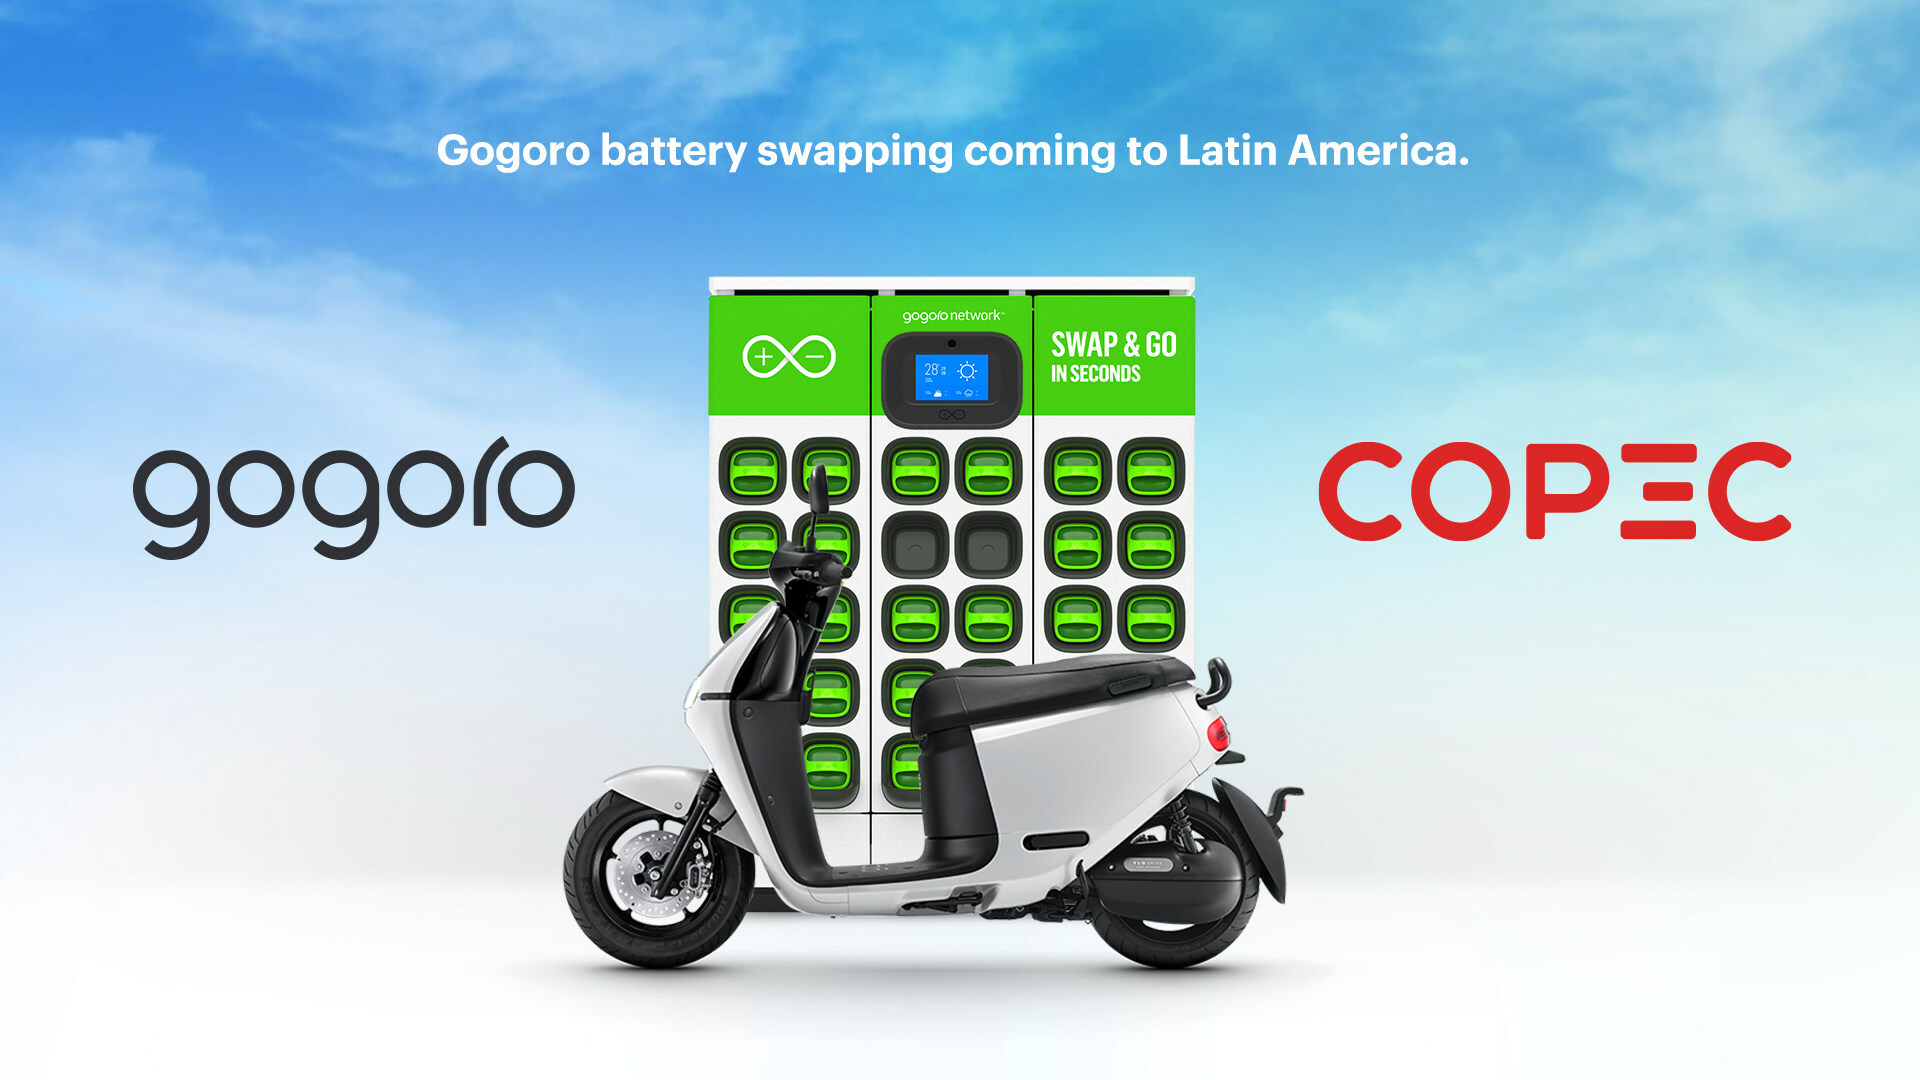 At the heart of Gogoro's ecosystem is an open and interoperable battery swapping platform. Image: Gogoro